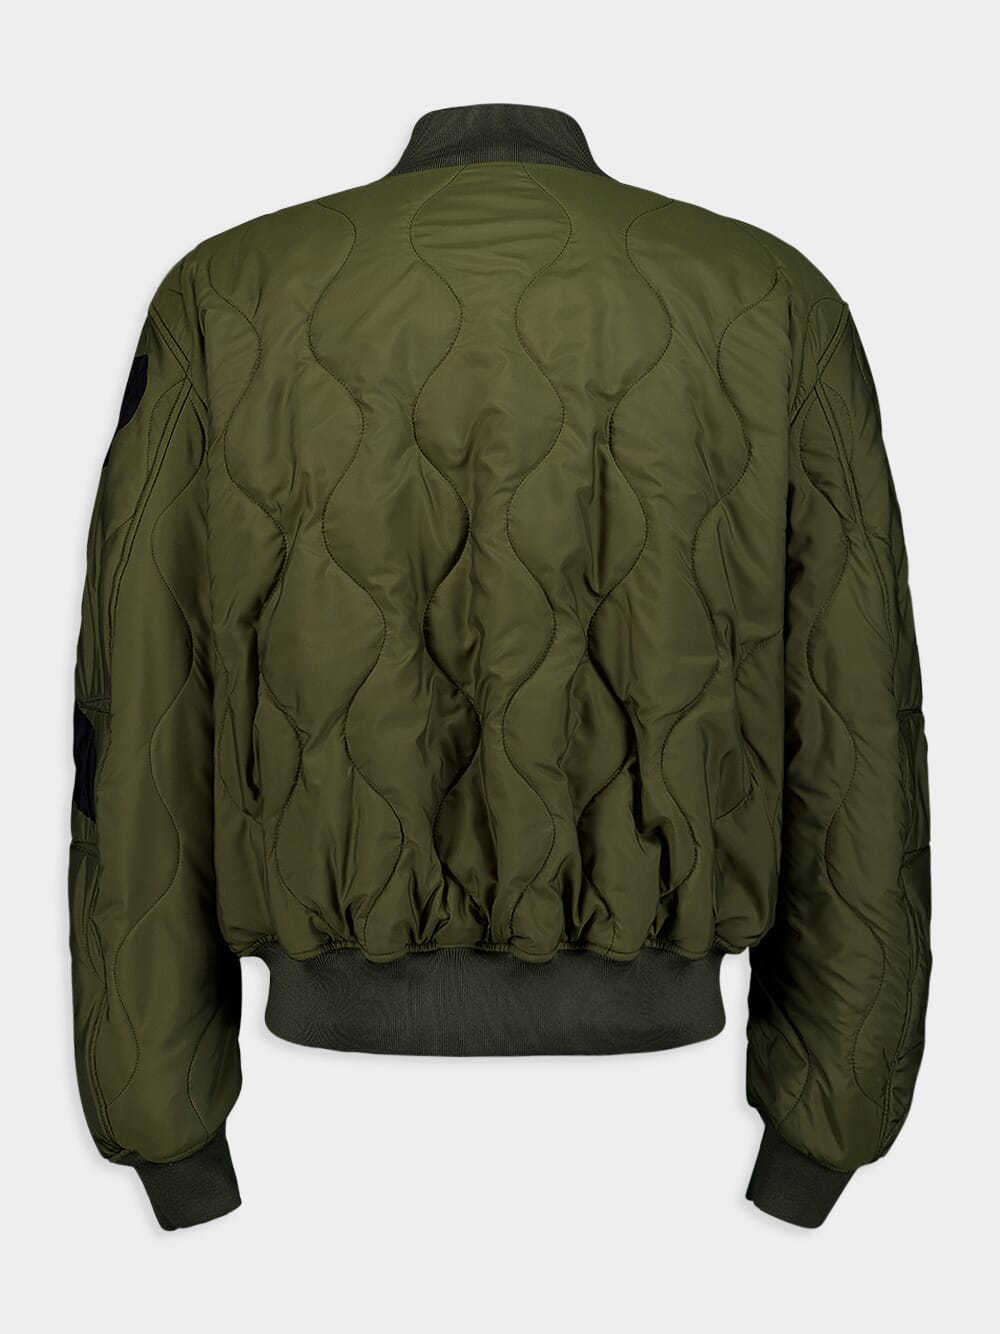 Alexander McQueenOrchid Bomber Jacket at Fashion Clinic